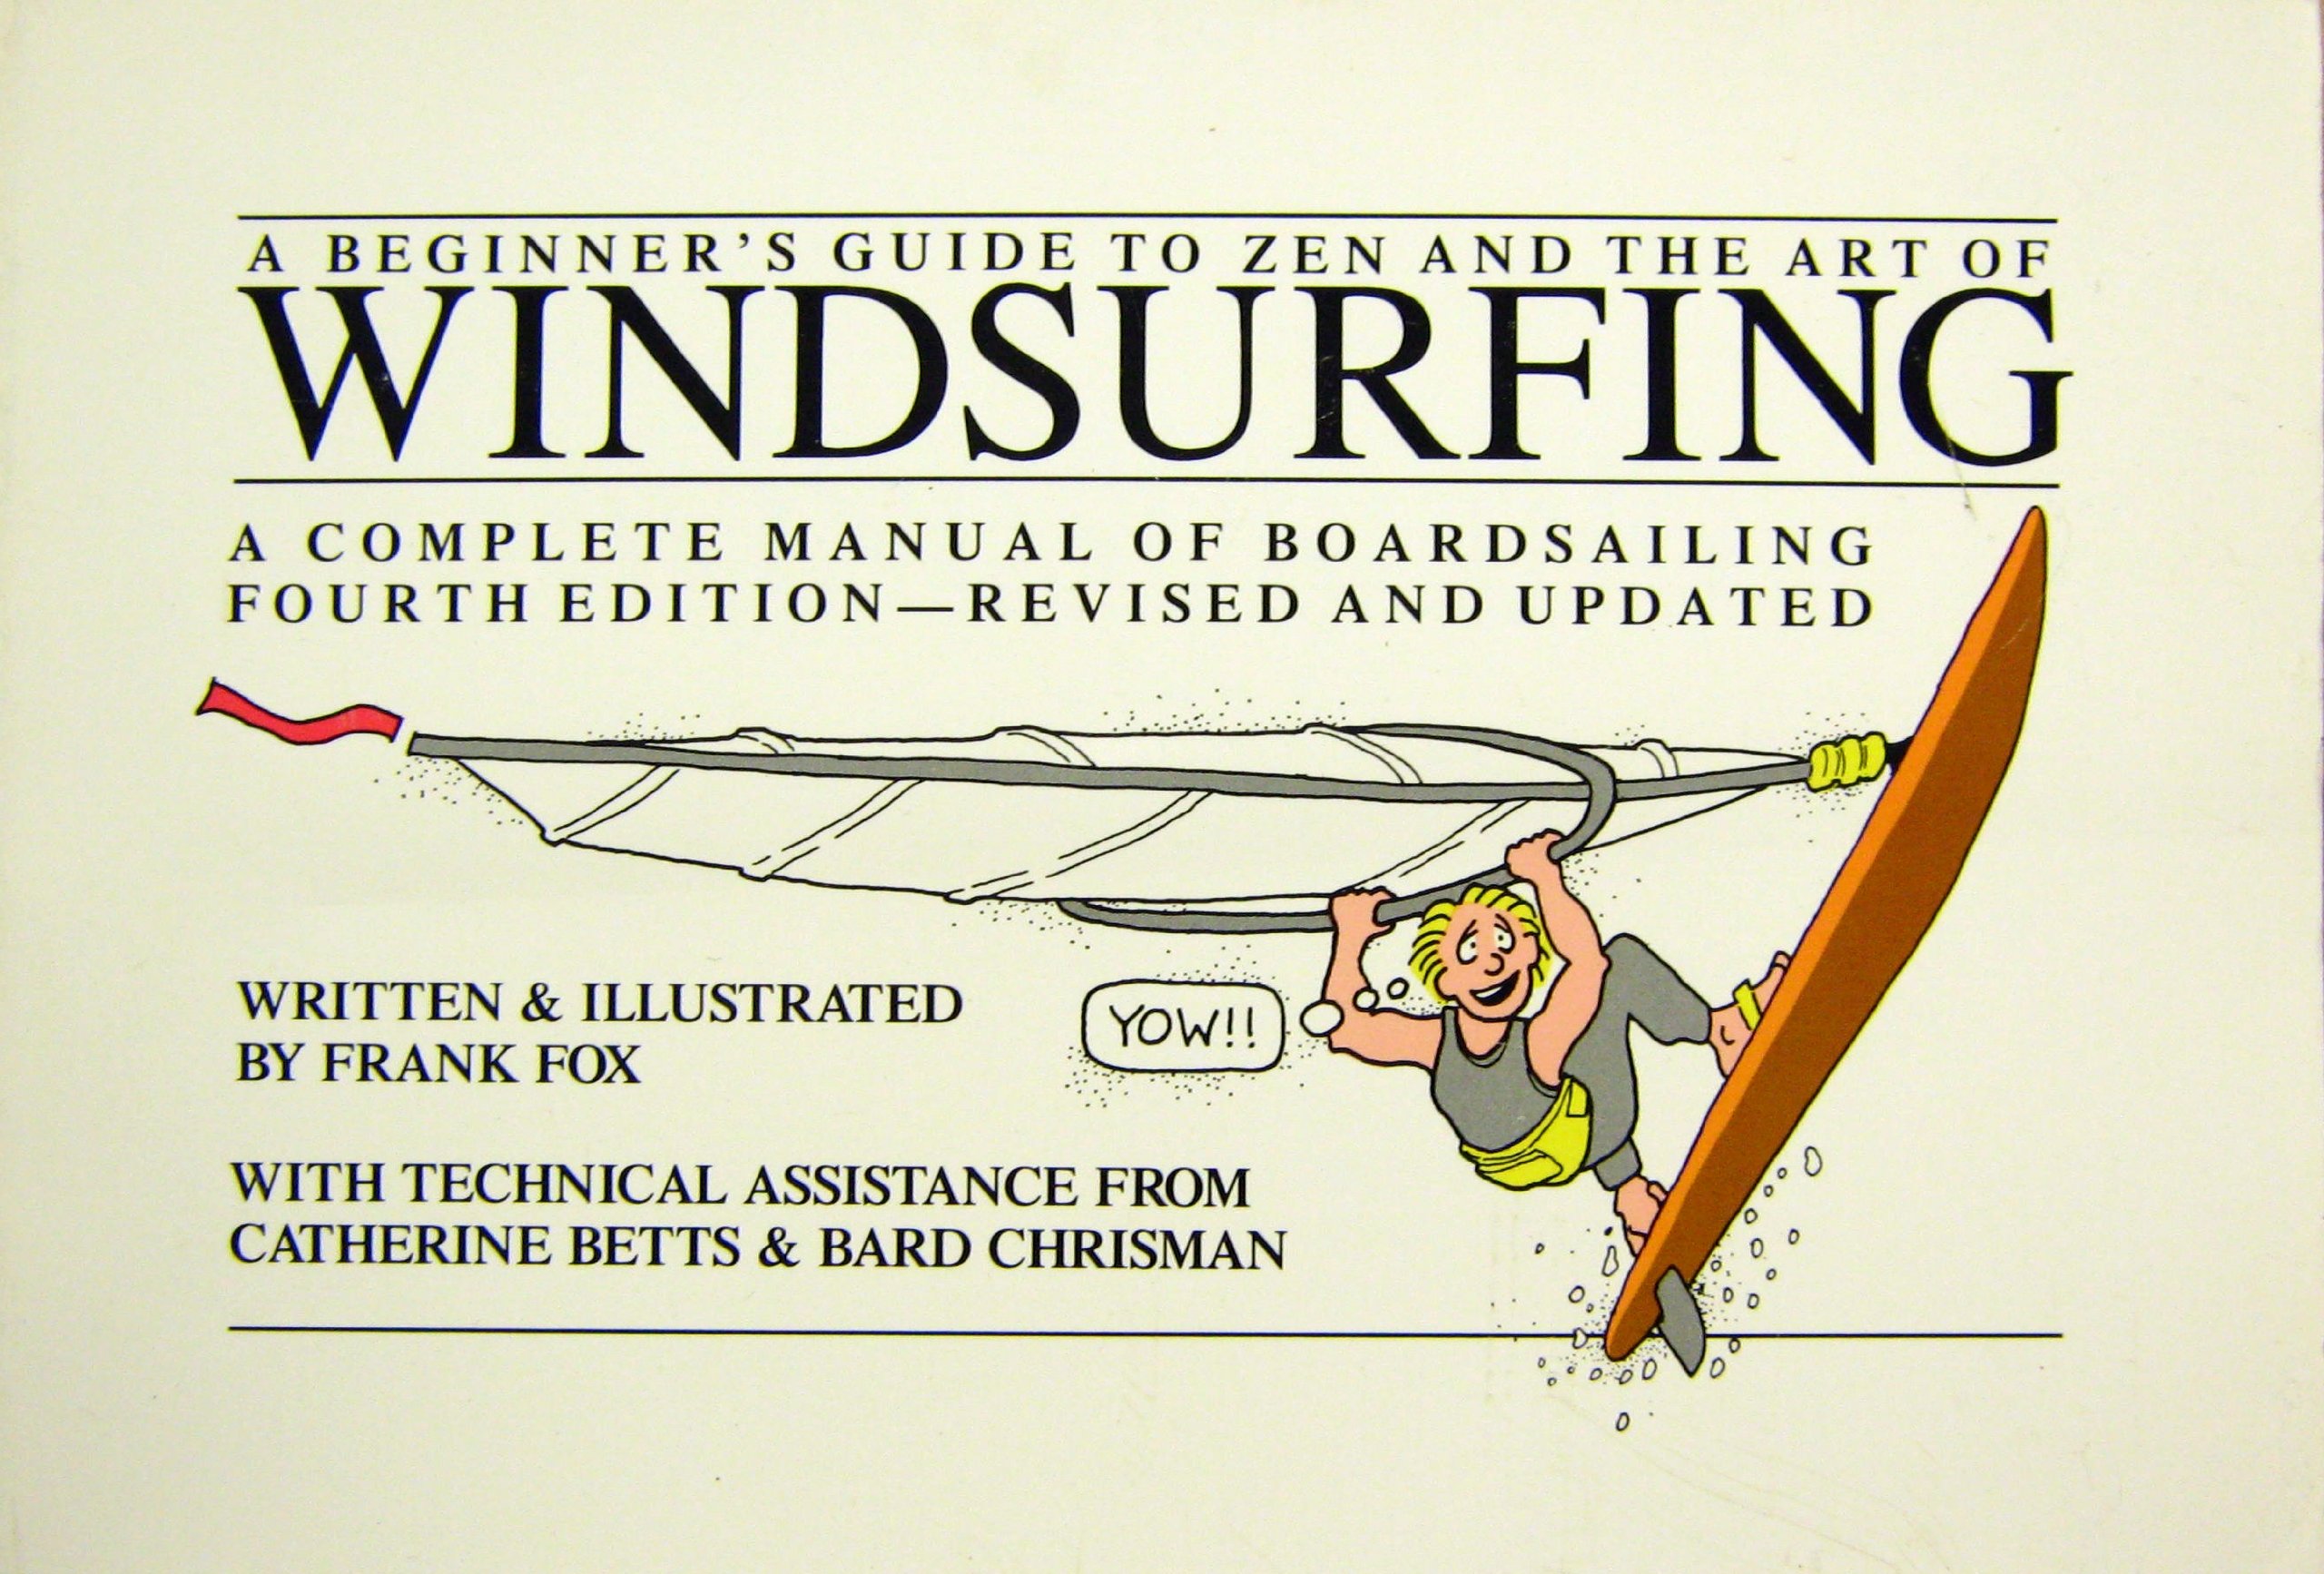 A beginner's guide to Zen and the art of windsurfing!